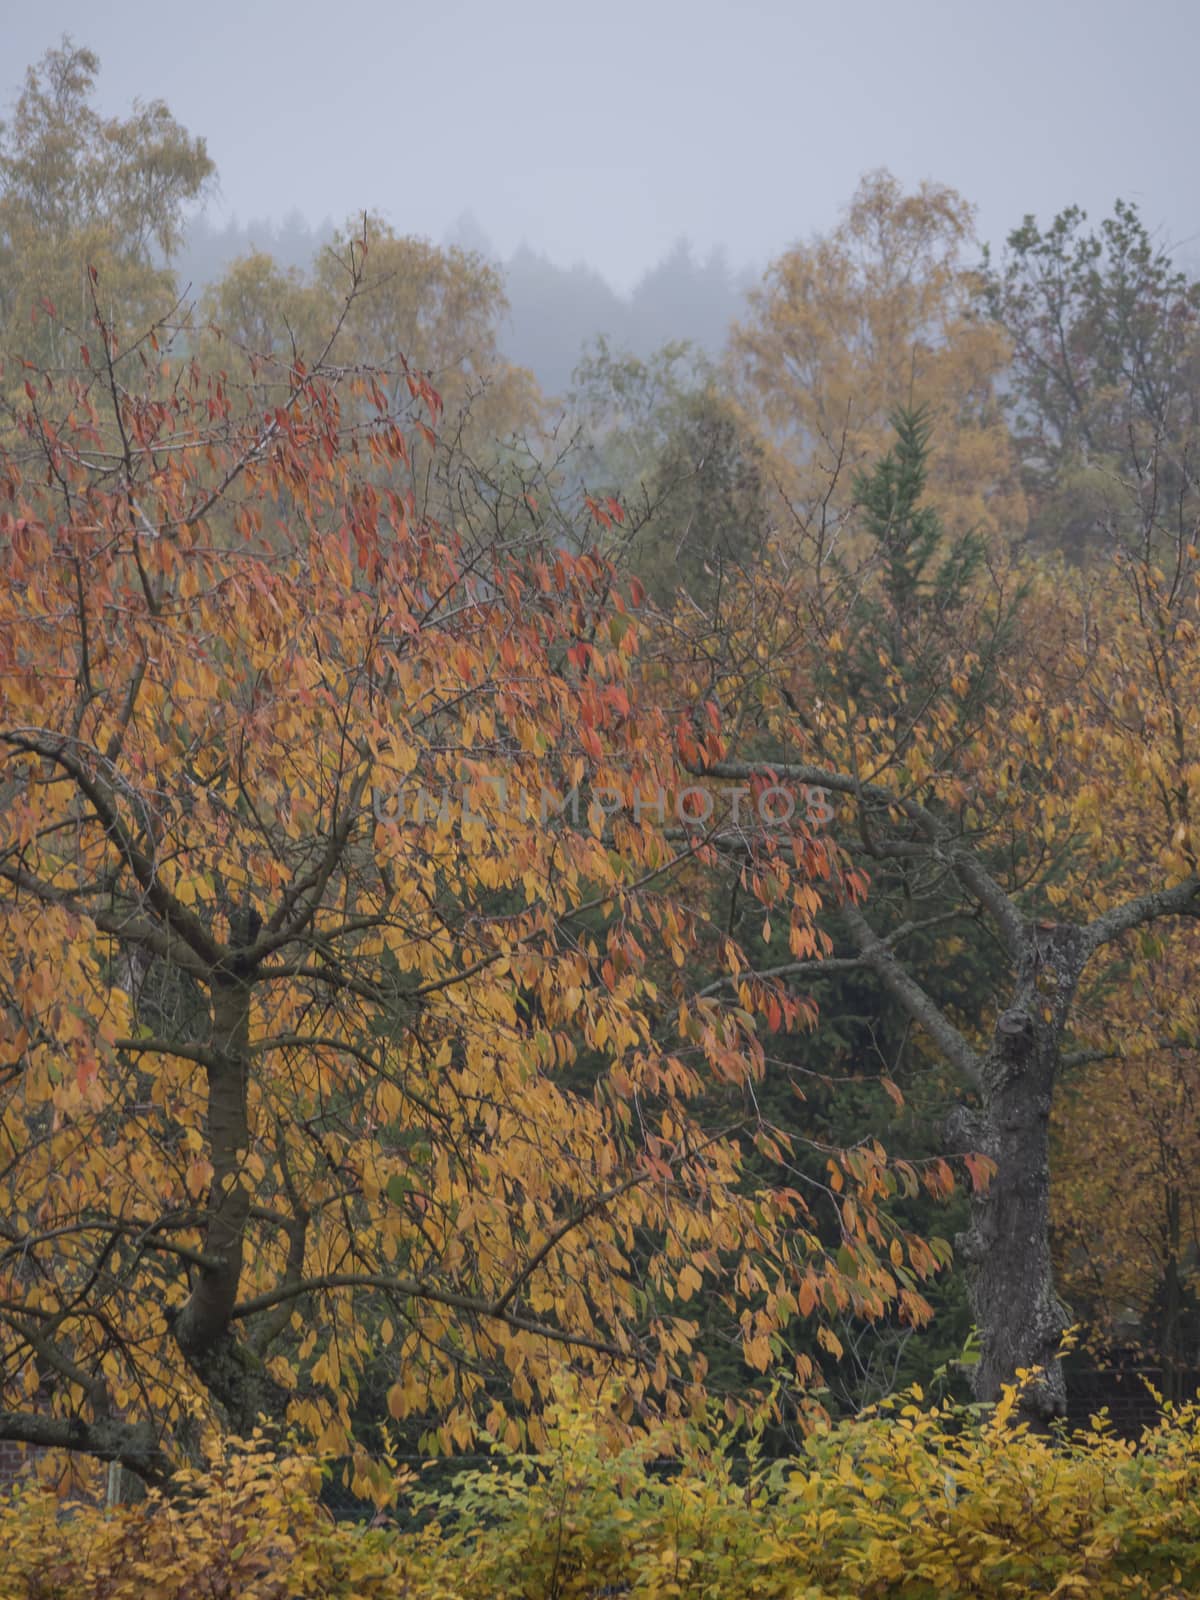 Vibrant Autumn Colours of the Leaves on Cherry Tree, deciduous trees and bush in moody foggy autumn day with mist background in a countryside.